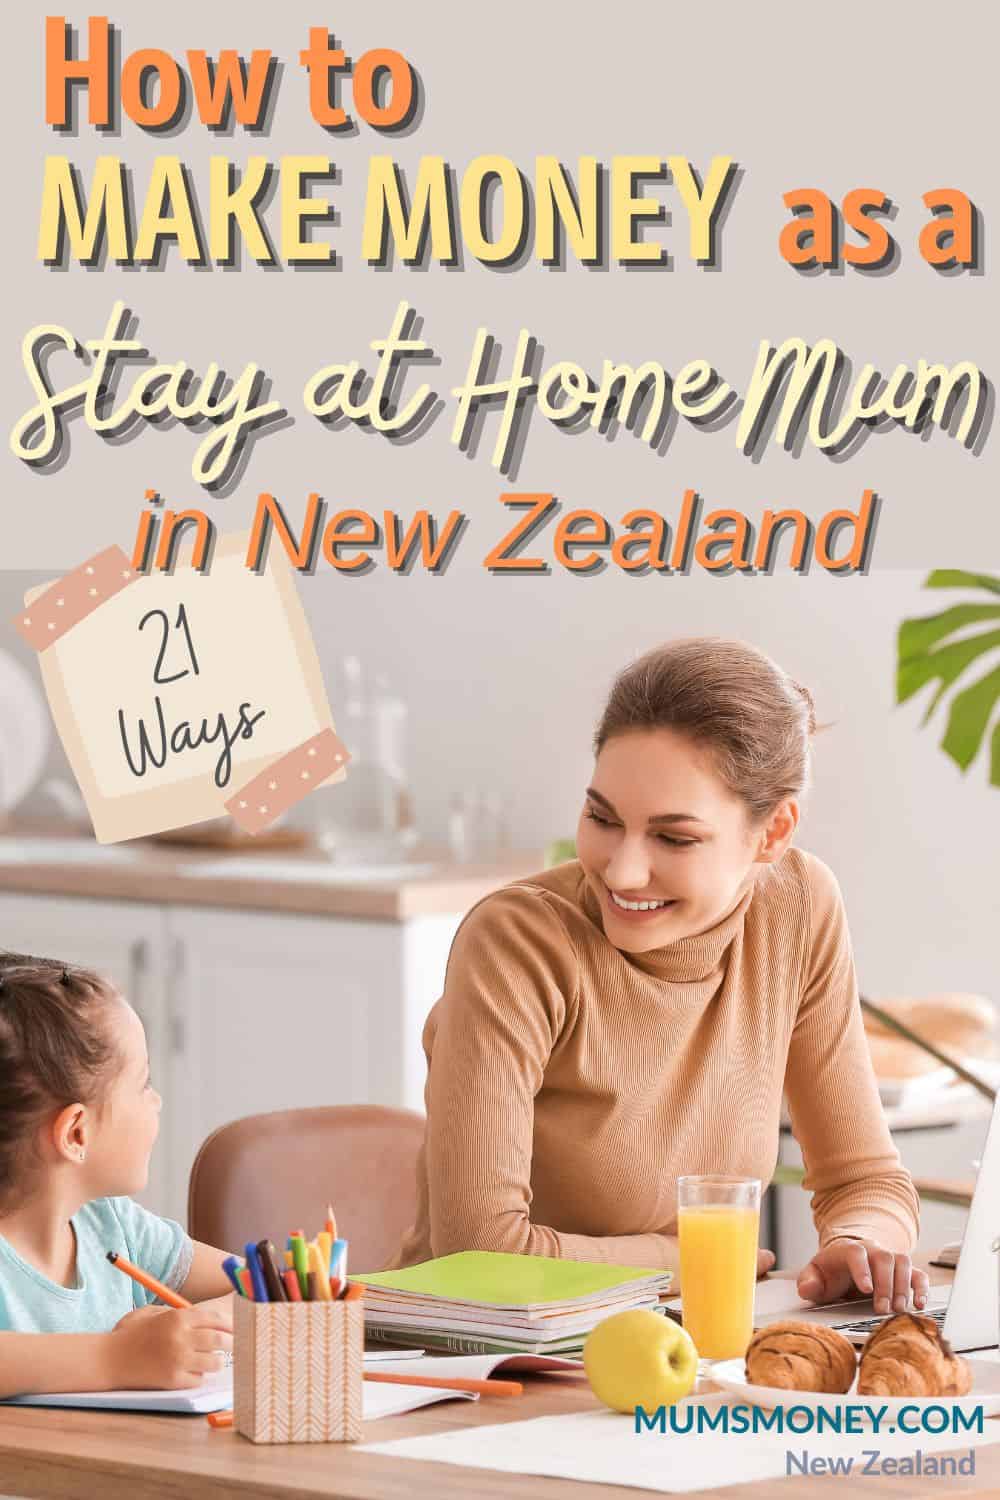 Image of a woman and her daugther talking to each other in their kitchen with text overlay that reads How To Make Money as a Stay at Home Mum